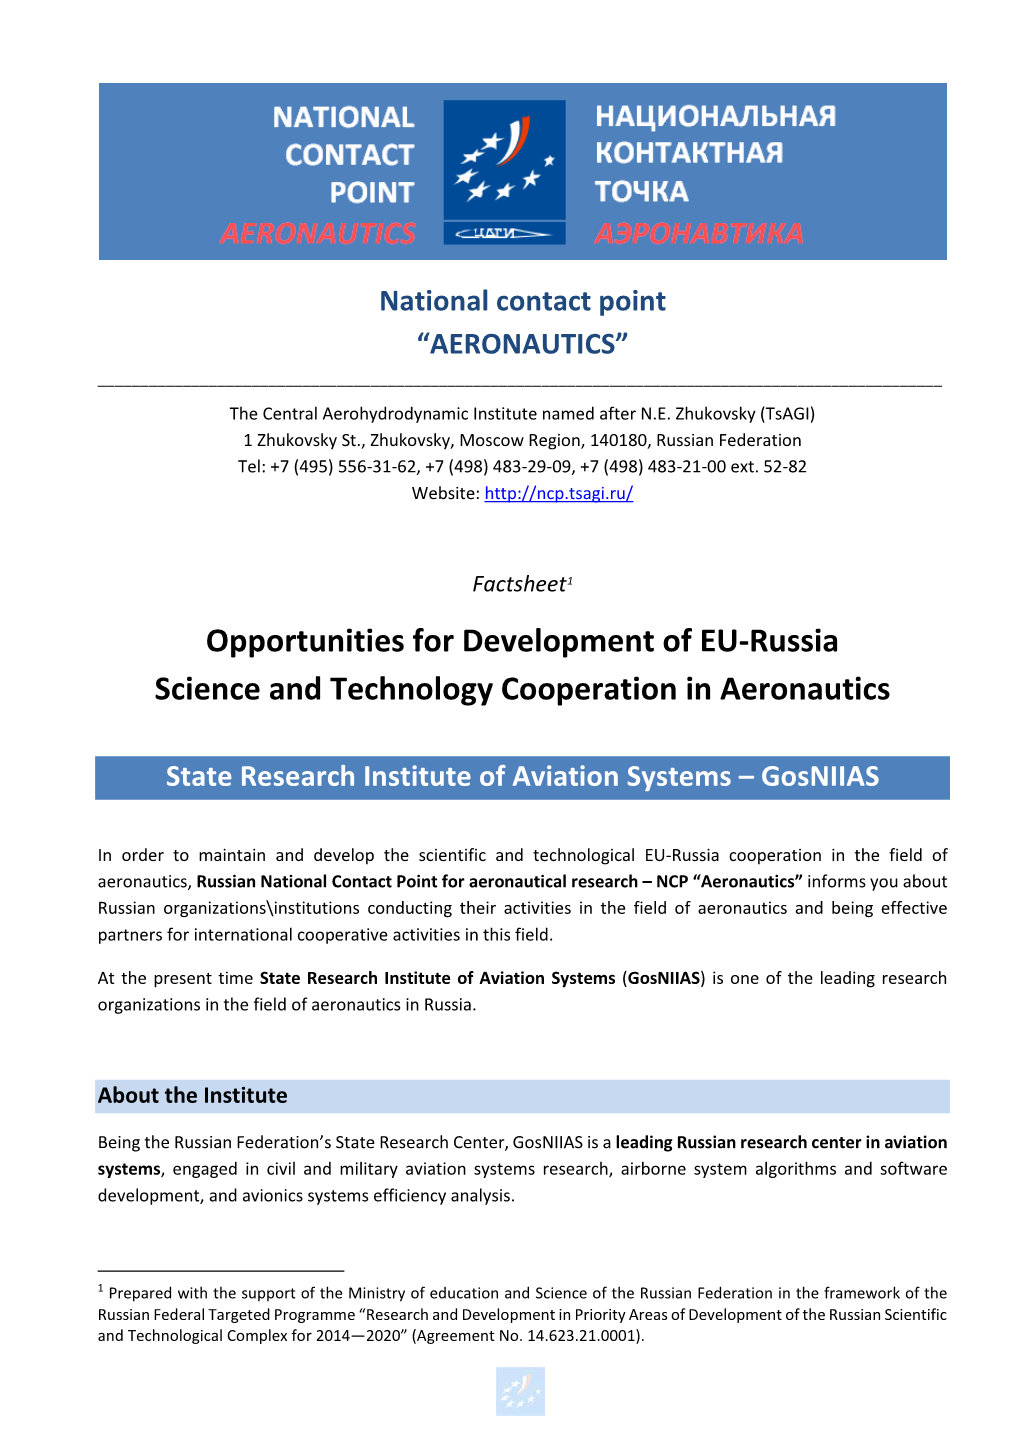 Opportunities for Development of EU-Russia Science and Technology Cooperation in Aeronautics